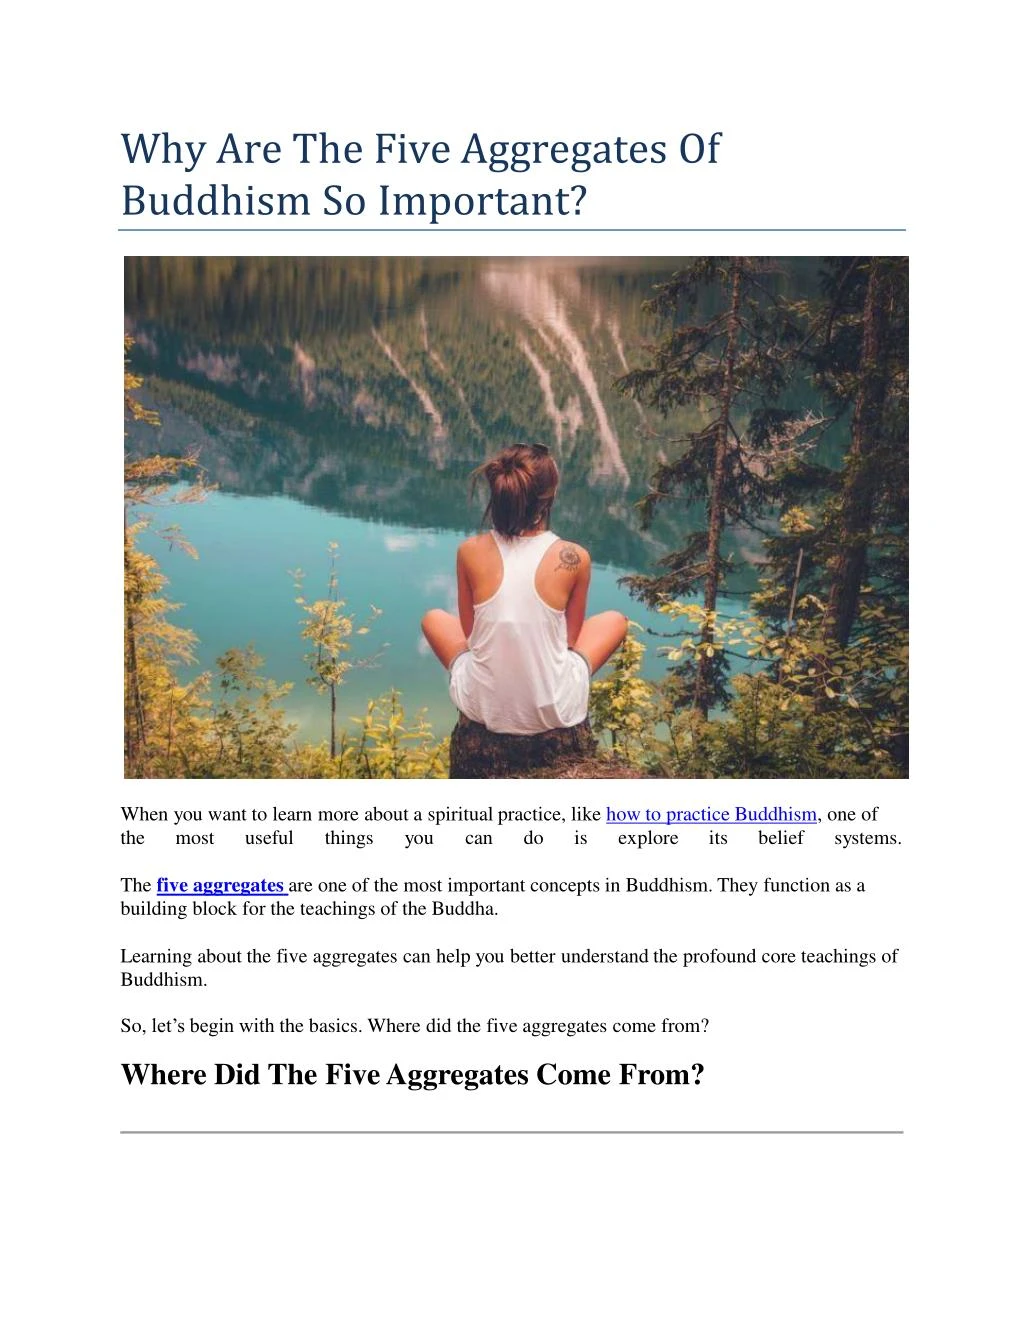 why are the five aggregates of buddhism so important